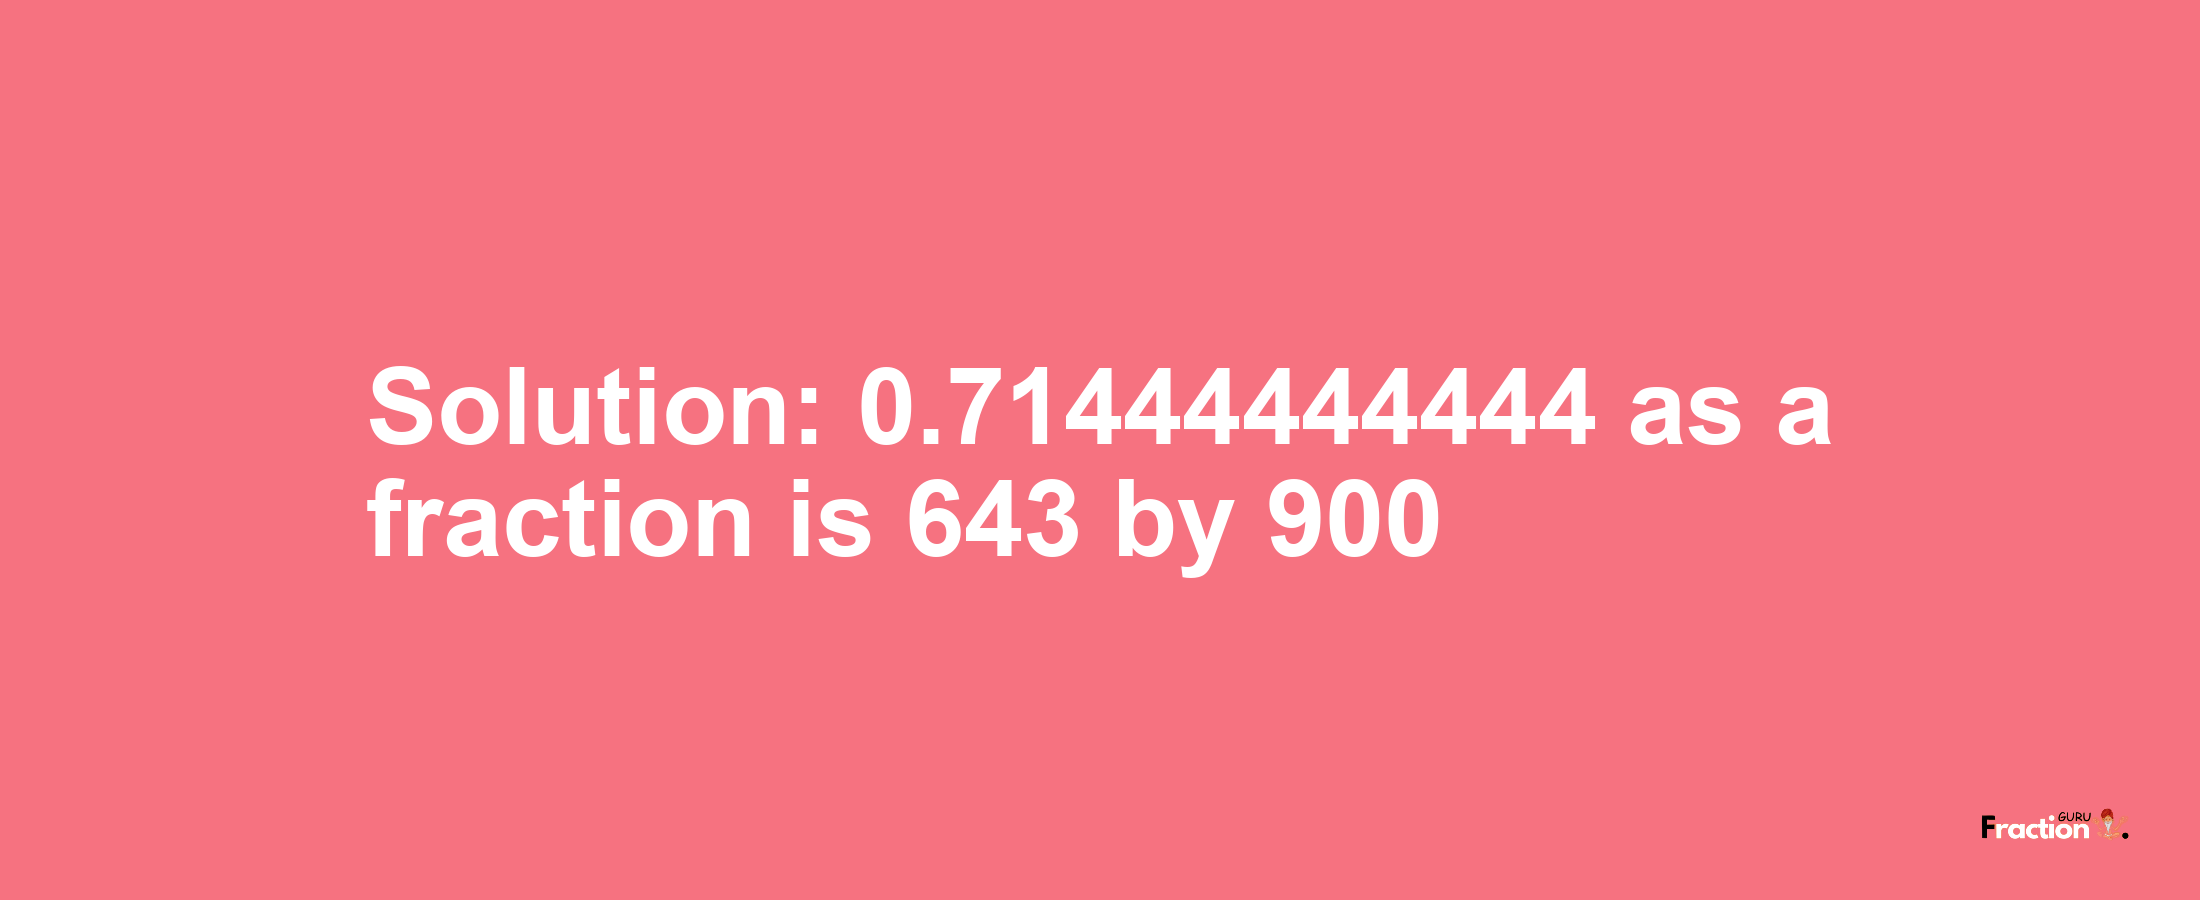 Solution:0.71444444444 as a fraction is 643/900